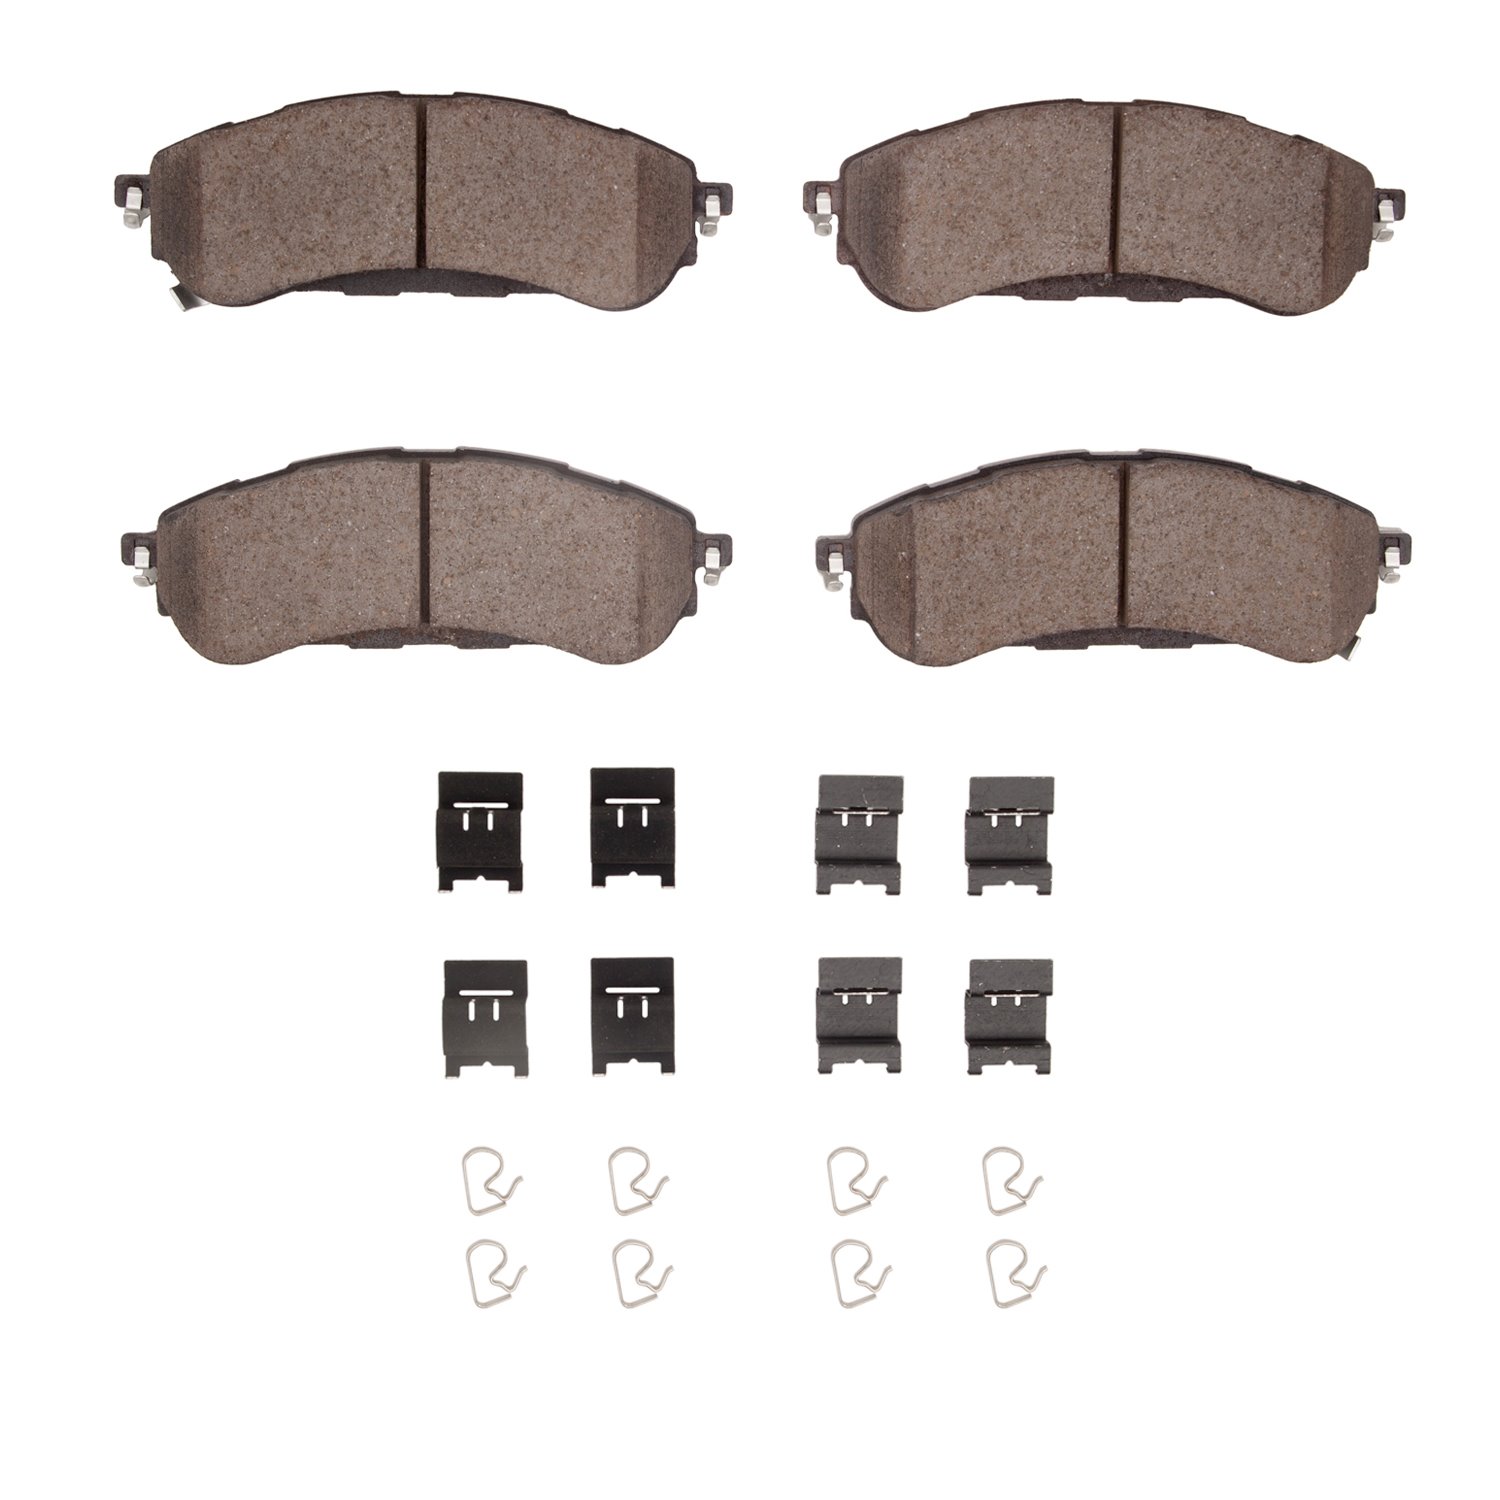 1310-2208-01 3000-Series Ceramic Brake Pads & Hardware Kit, Fits Select Ford/Lincoln/Mercury/Mazda, Position: Rear